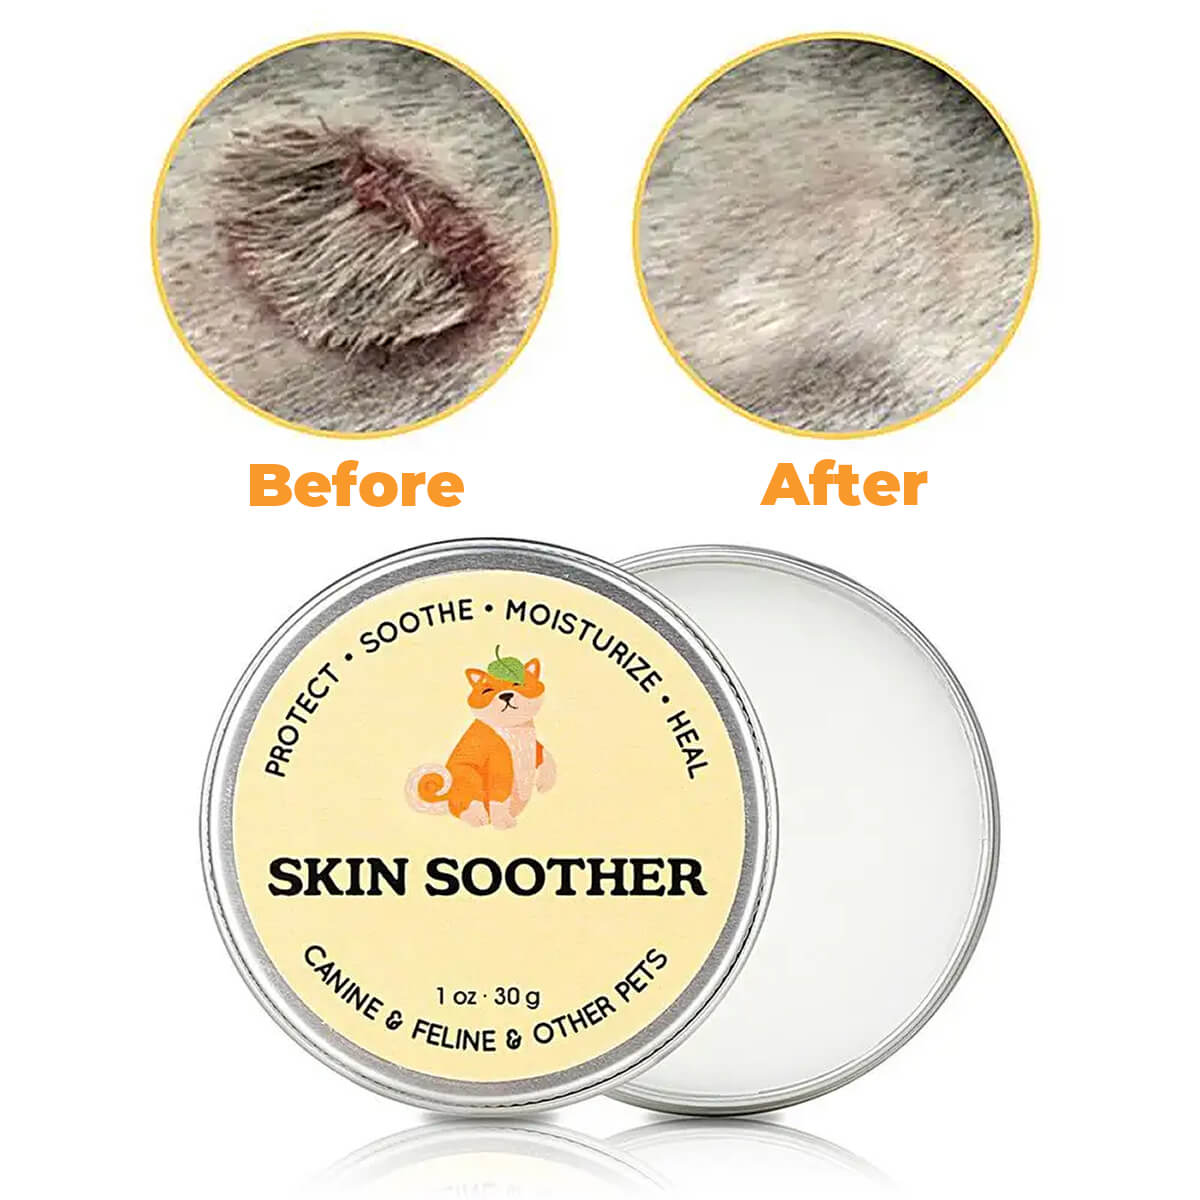 Can of French Bulldog Skin Sooth Balm with dog skin shown before and after use